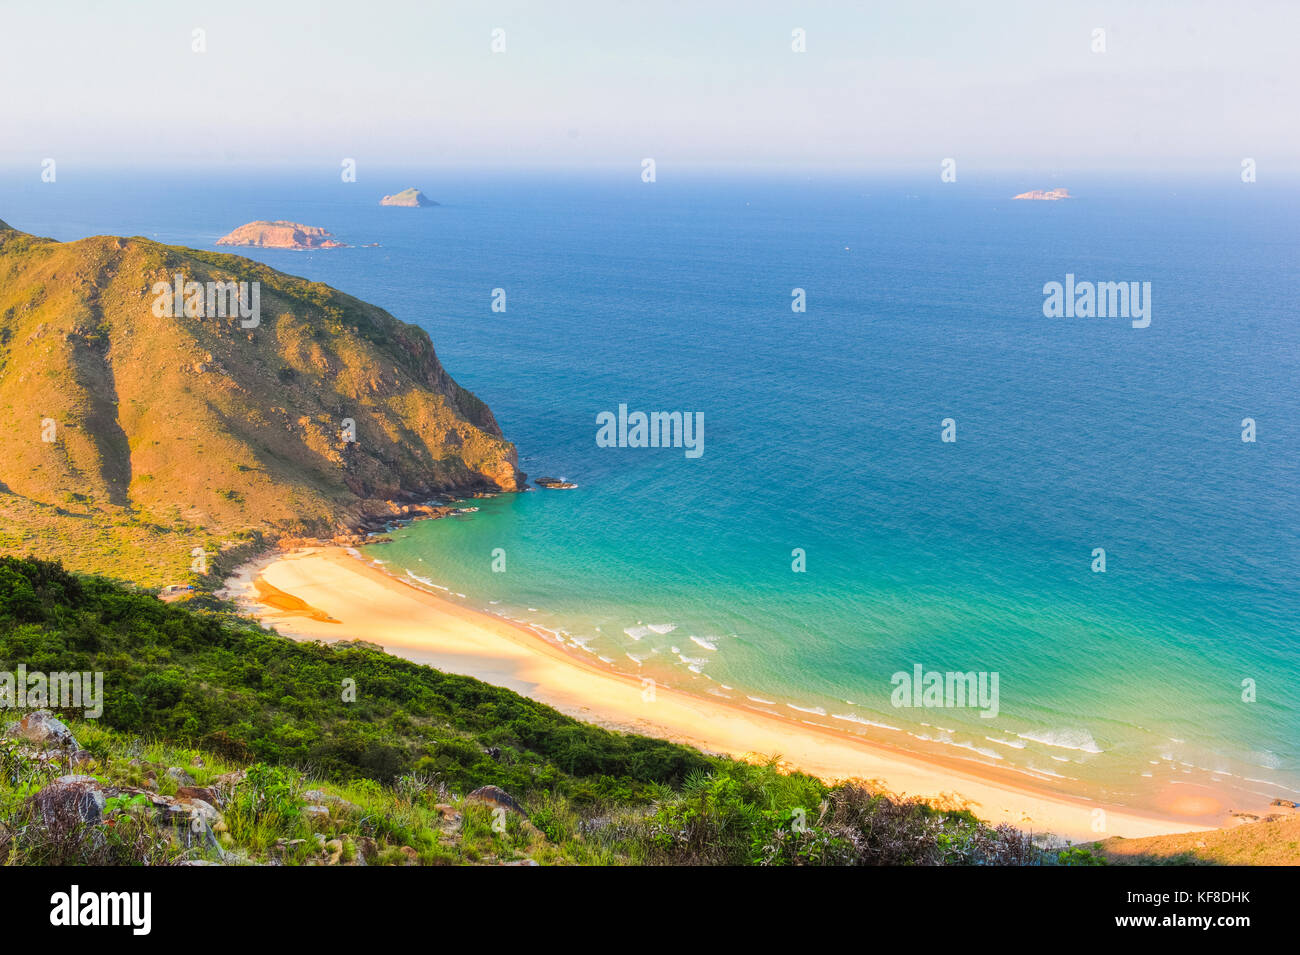 Ky Co beach in Binh Dinh province, Vietnam Stock Photo